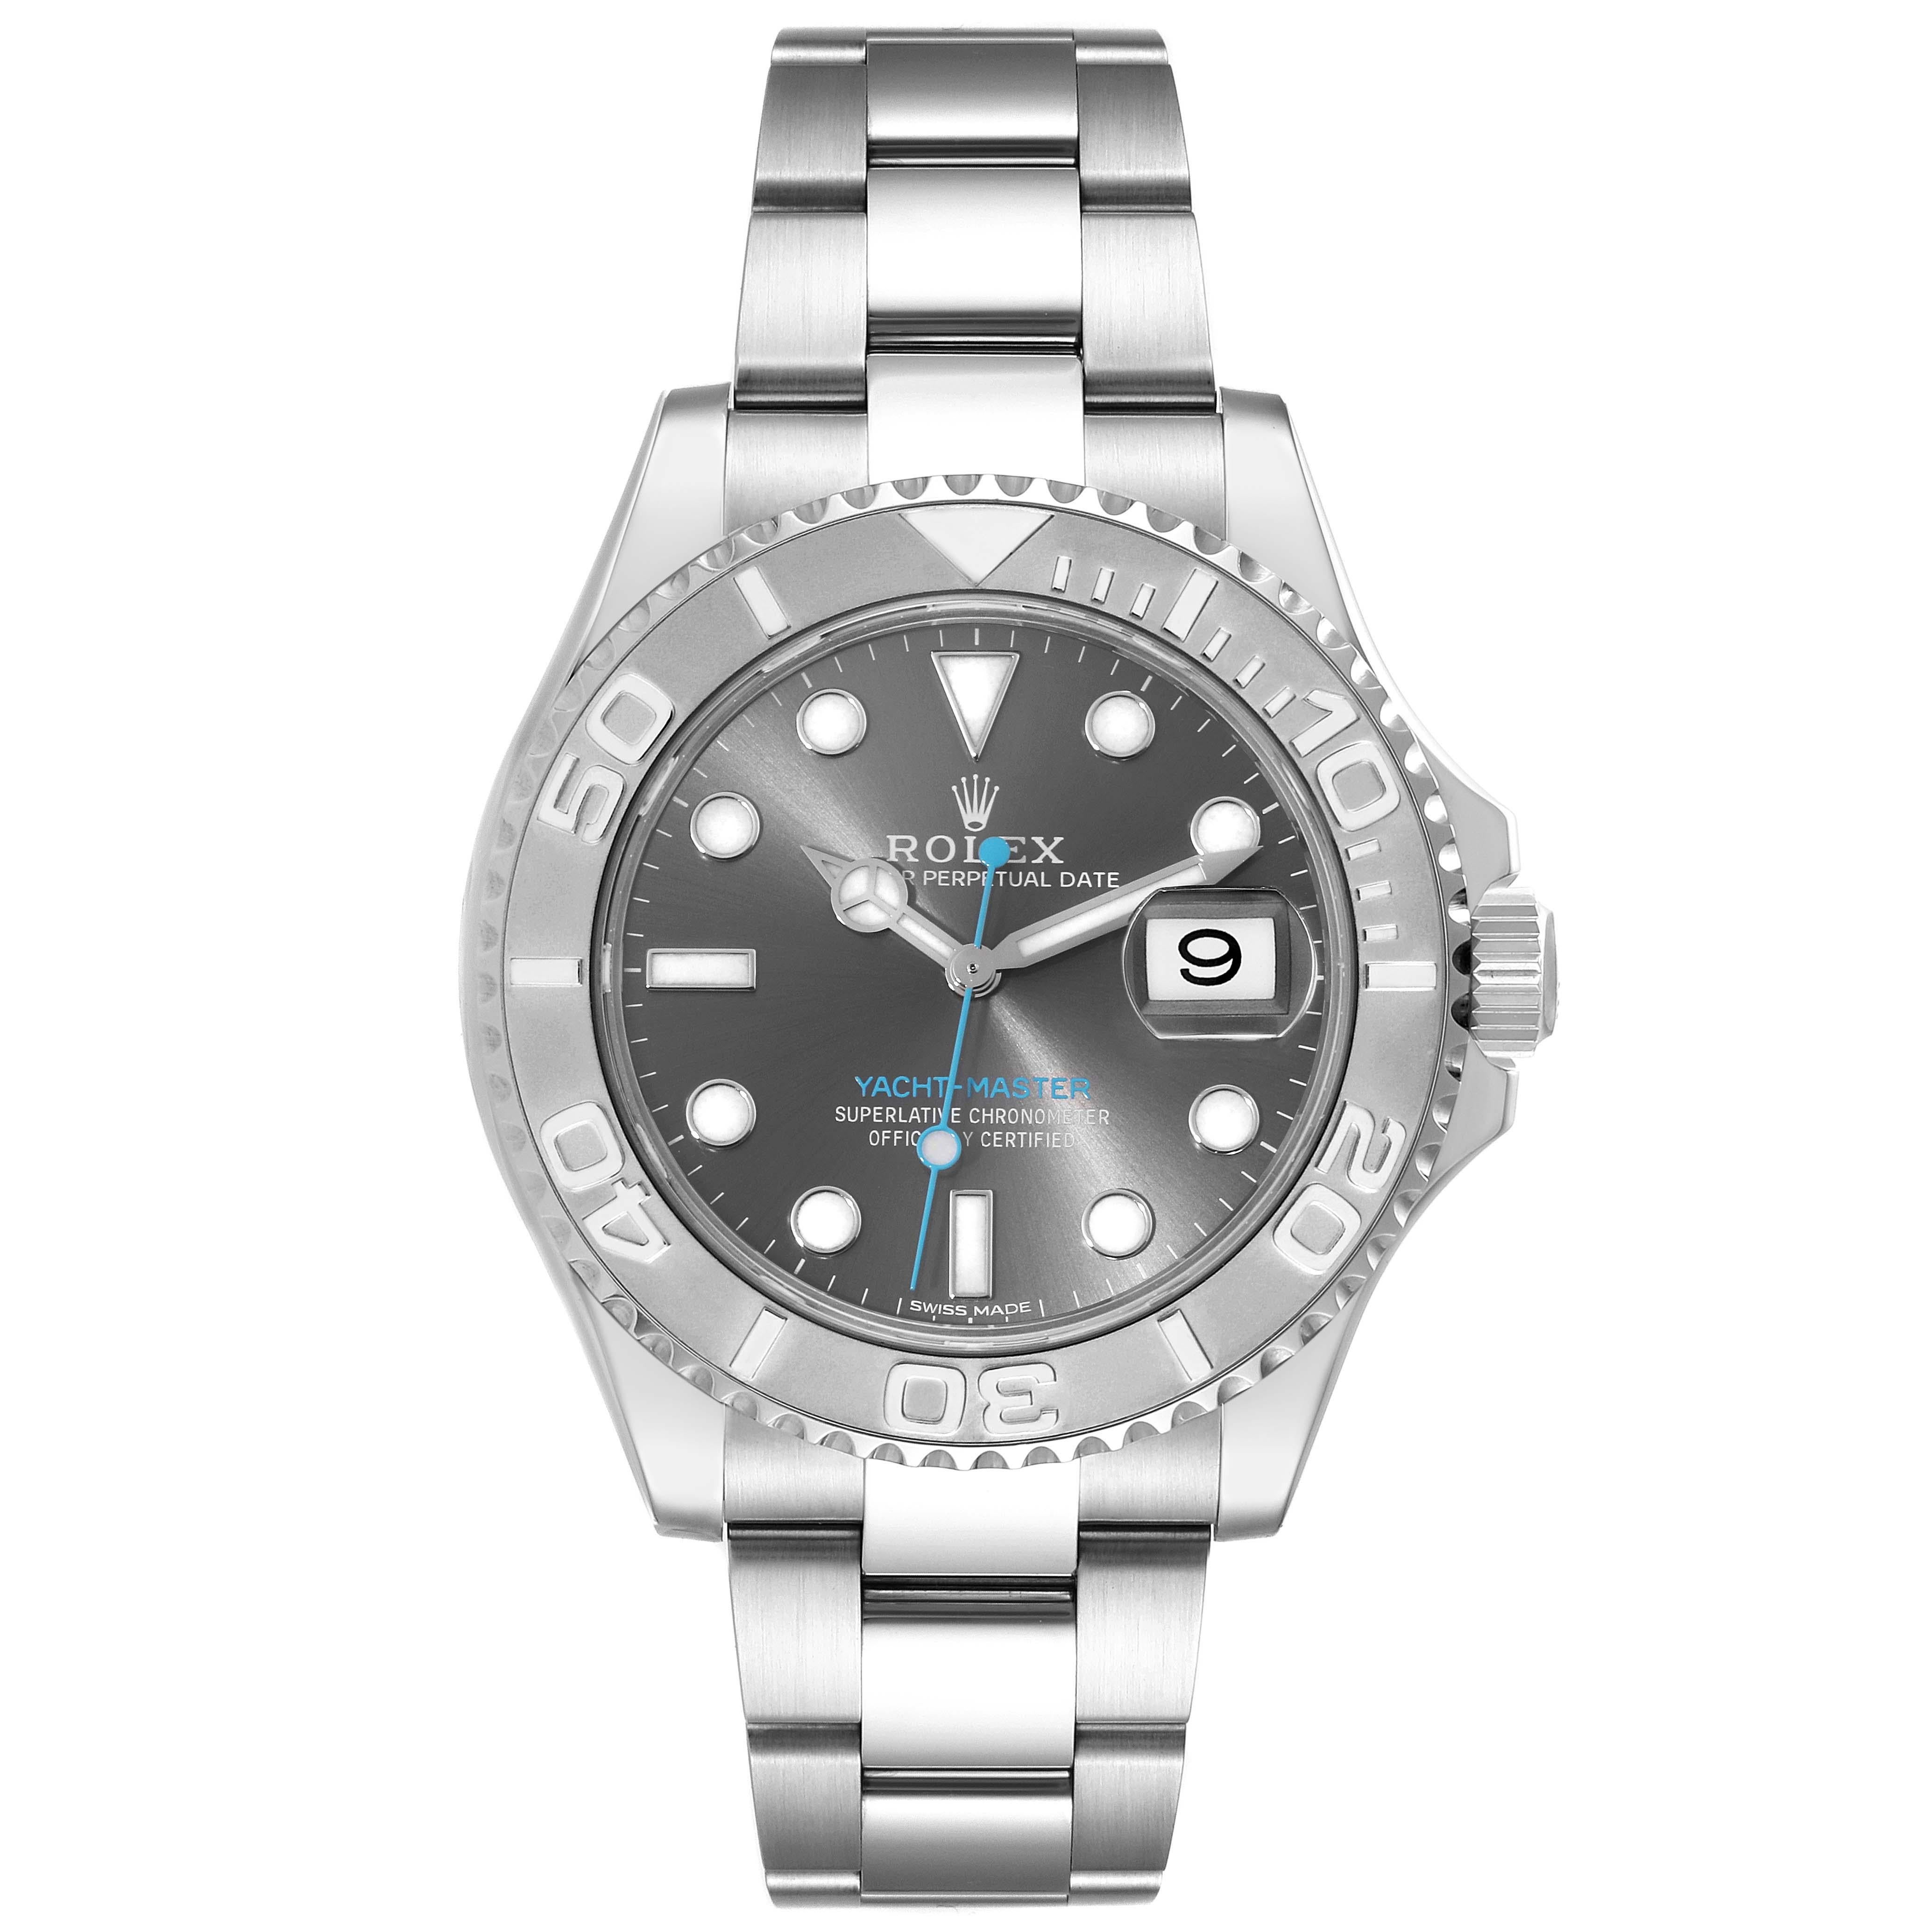 Rolex Yachtmaster Rhodium Dial Steel Platinum Mens Watch 116622 Box Card For Sale 5